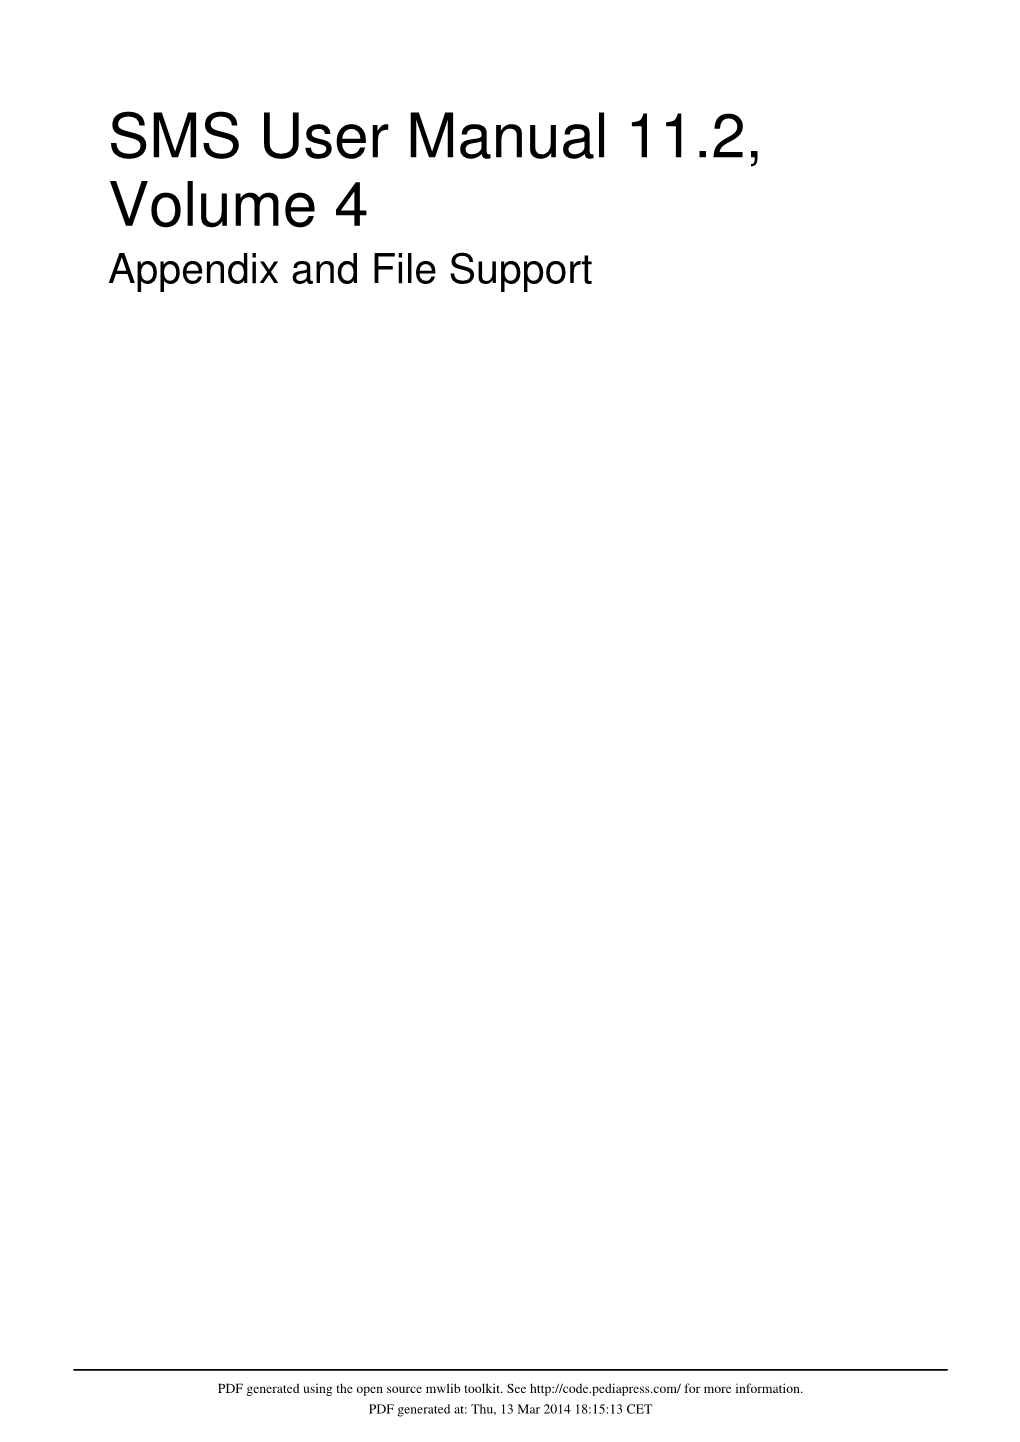 SMS User Manual 11.2, Volume 4 Appendix and File Support